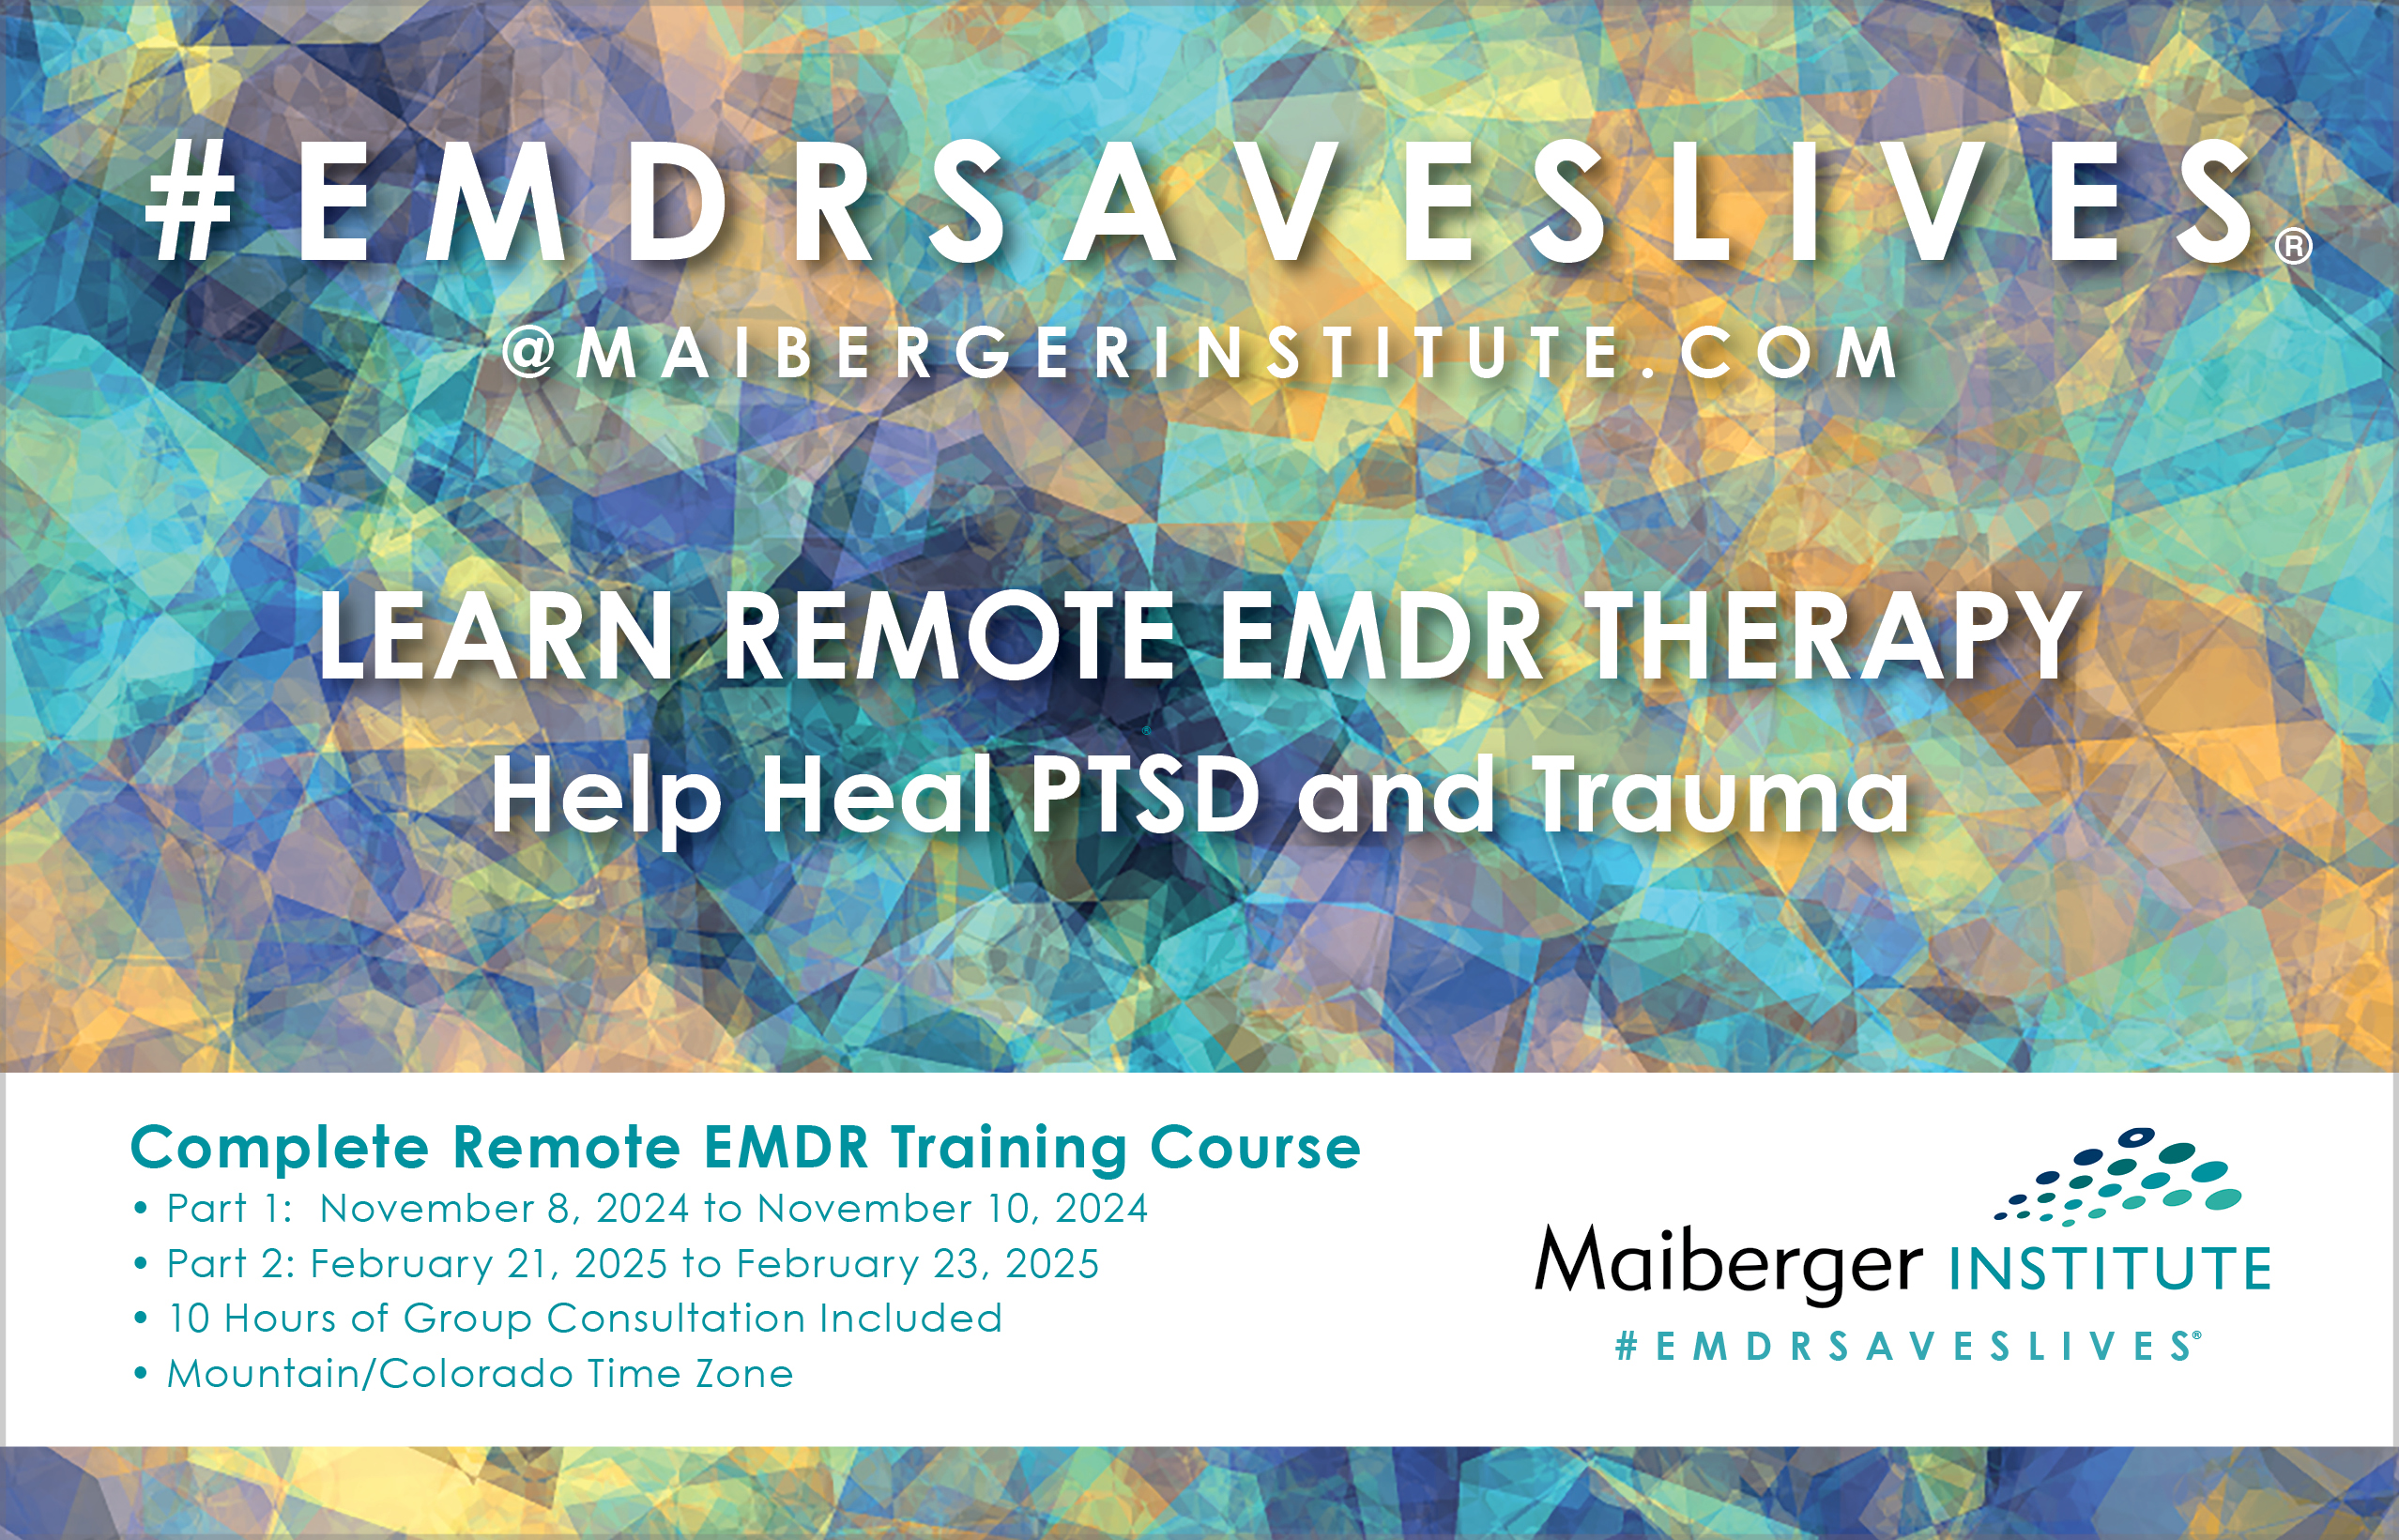 Complete Remote EMDR Training Course - November 2024 and February 2025 - EMDR Training Schedule - Maiberger Institute